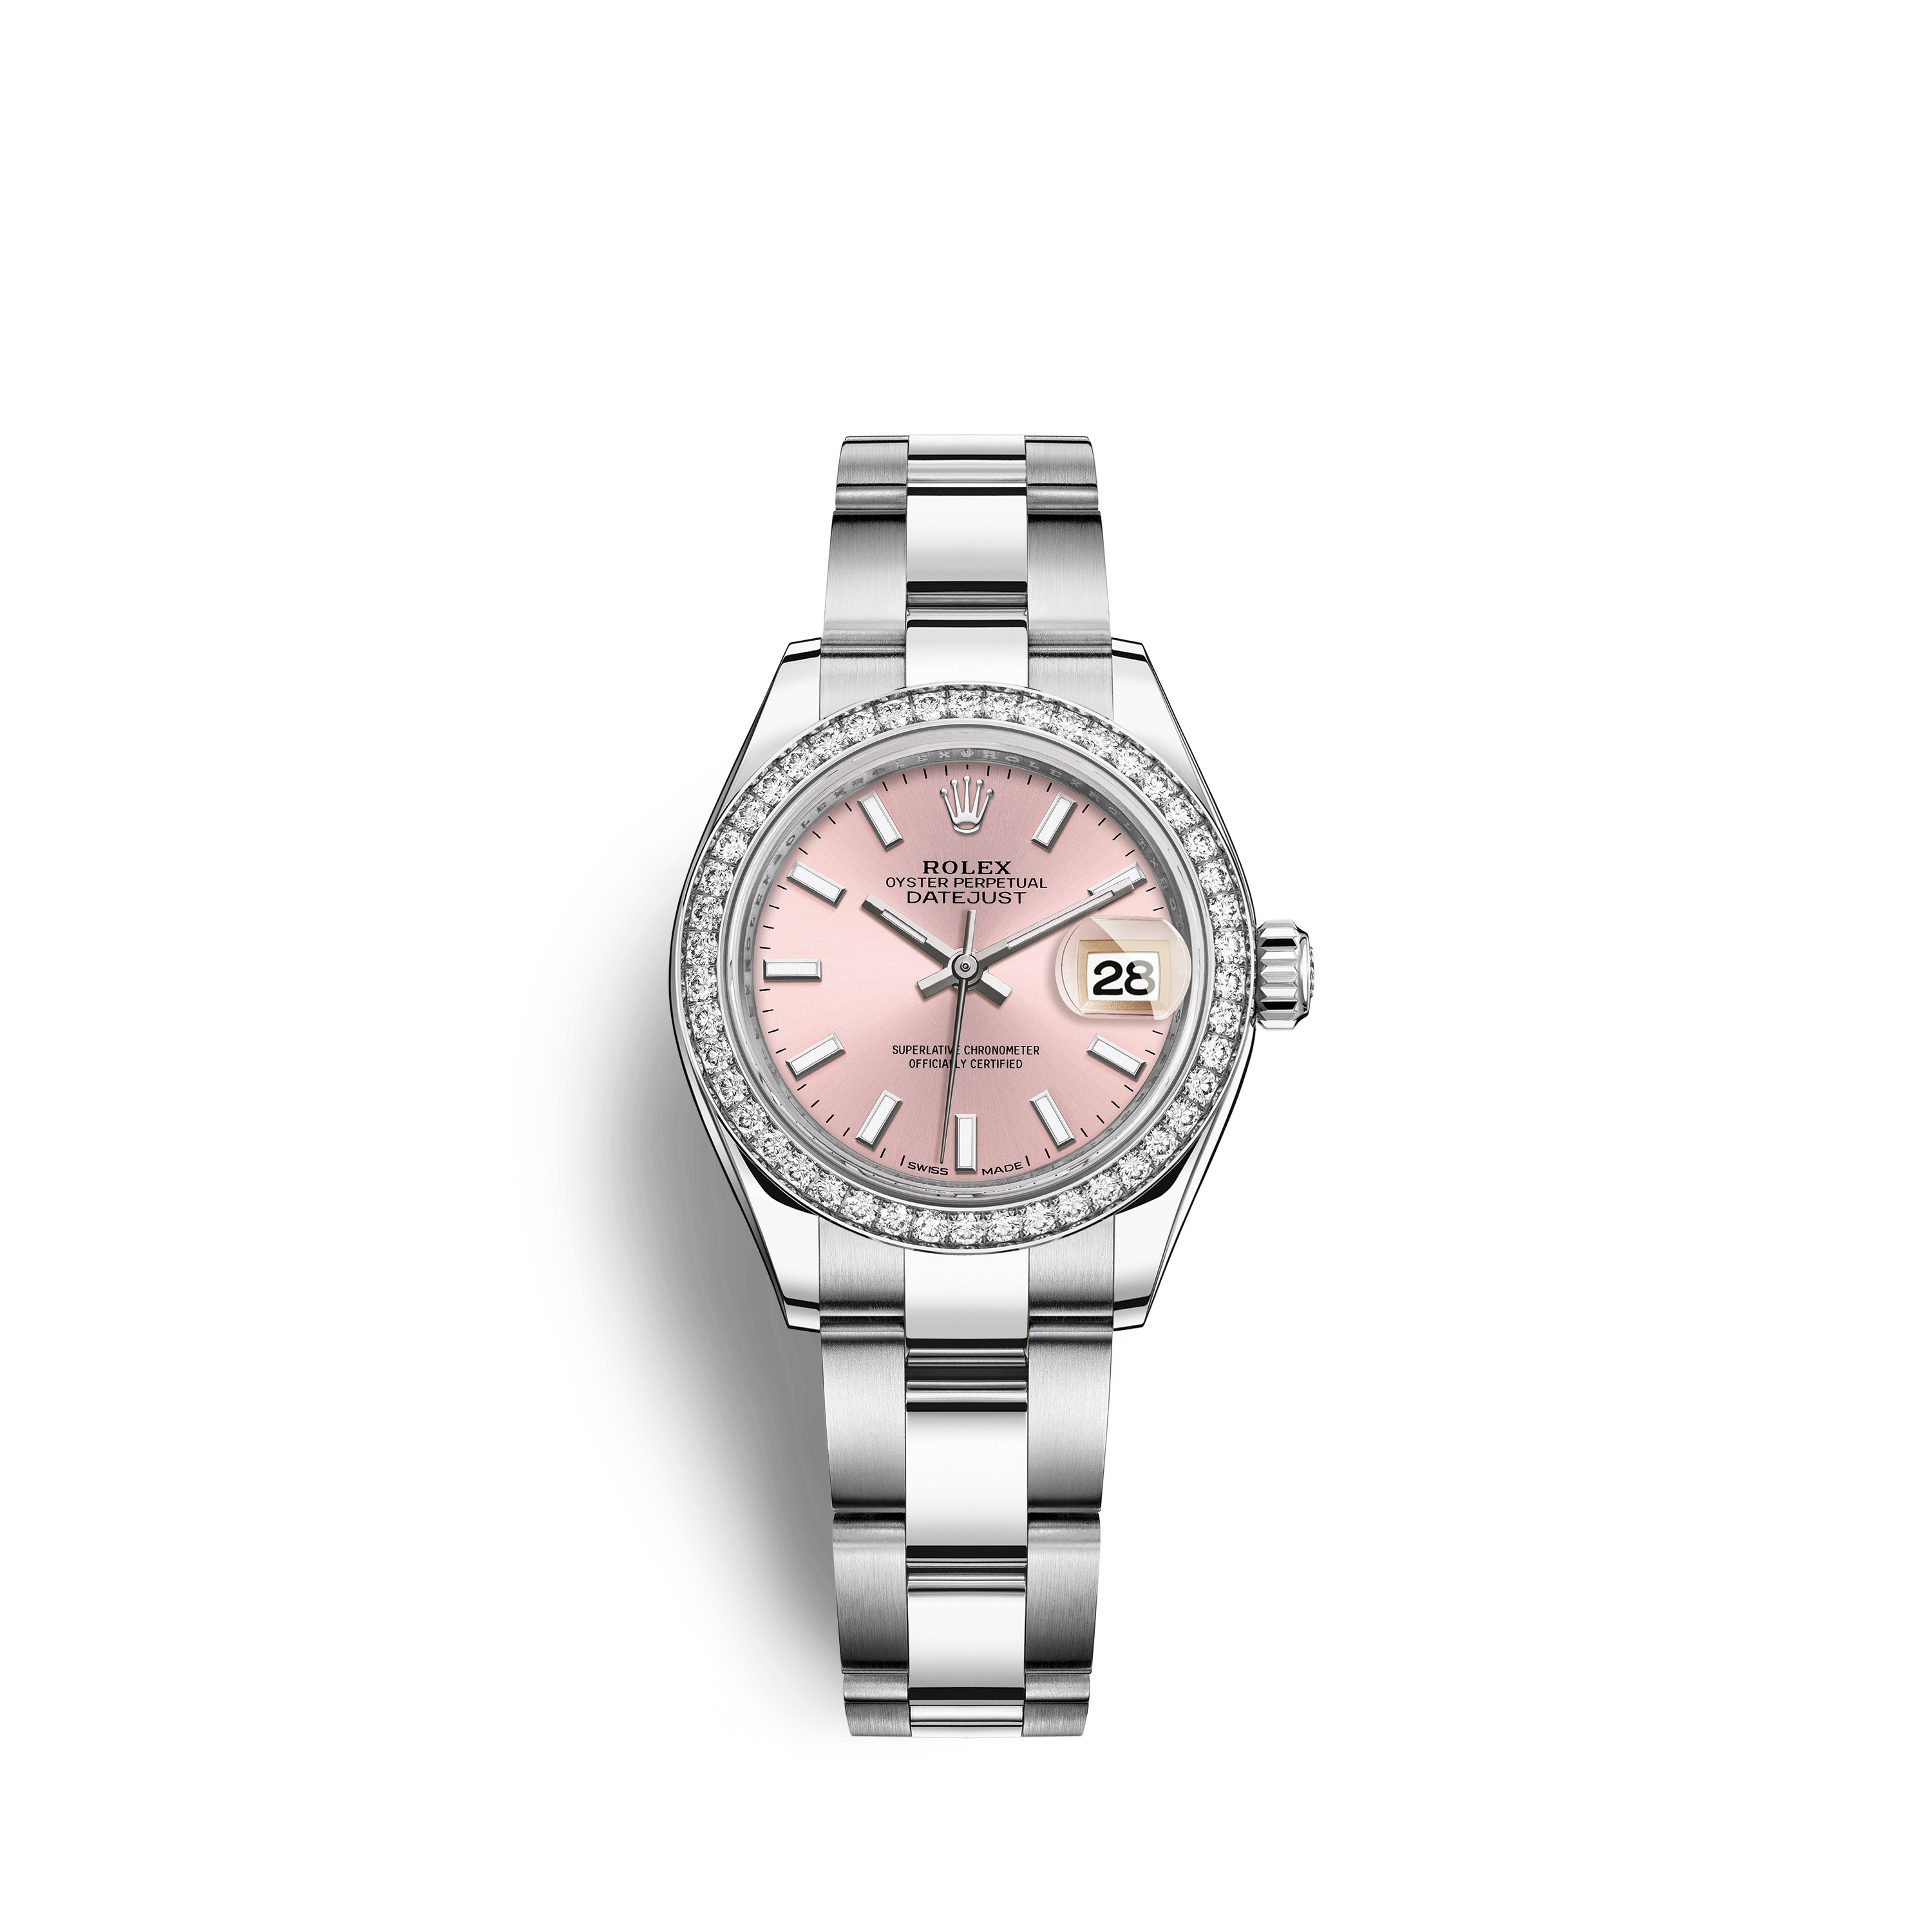 Lady-Datejust 28 279384RBR White Gold & Stainless Steel Watch (Pink)